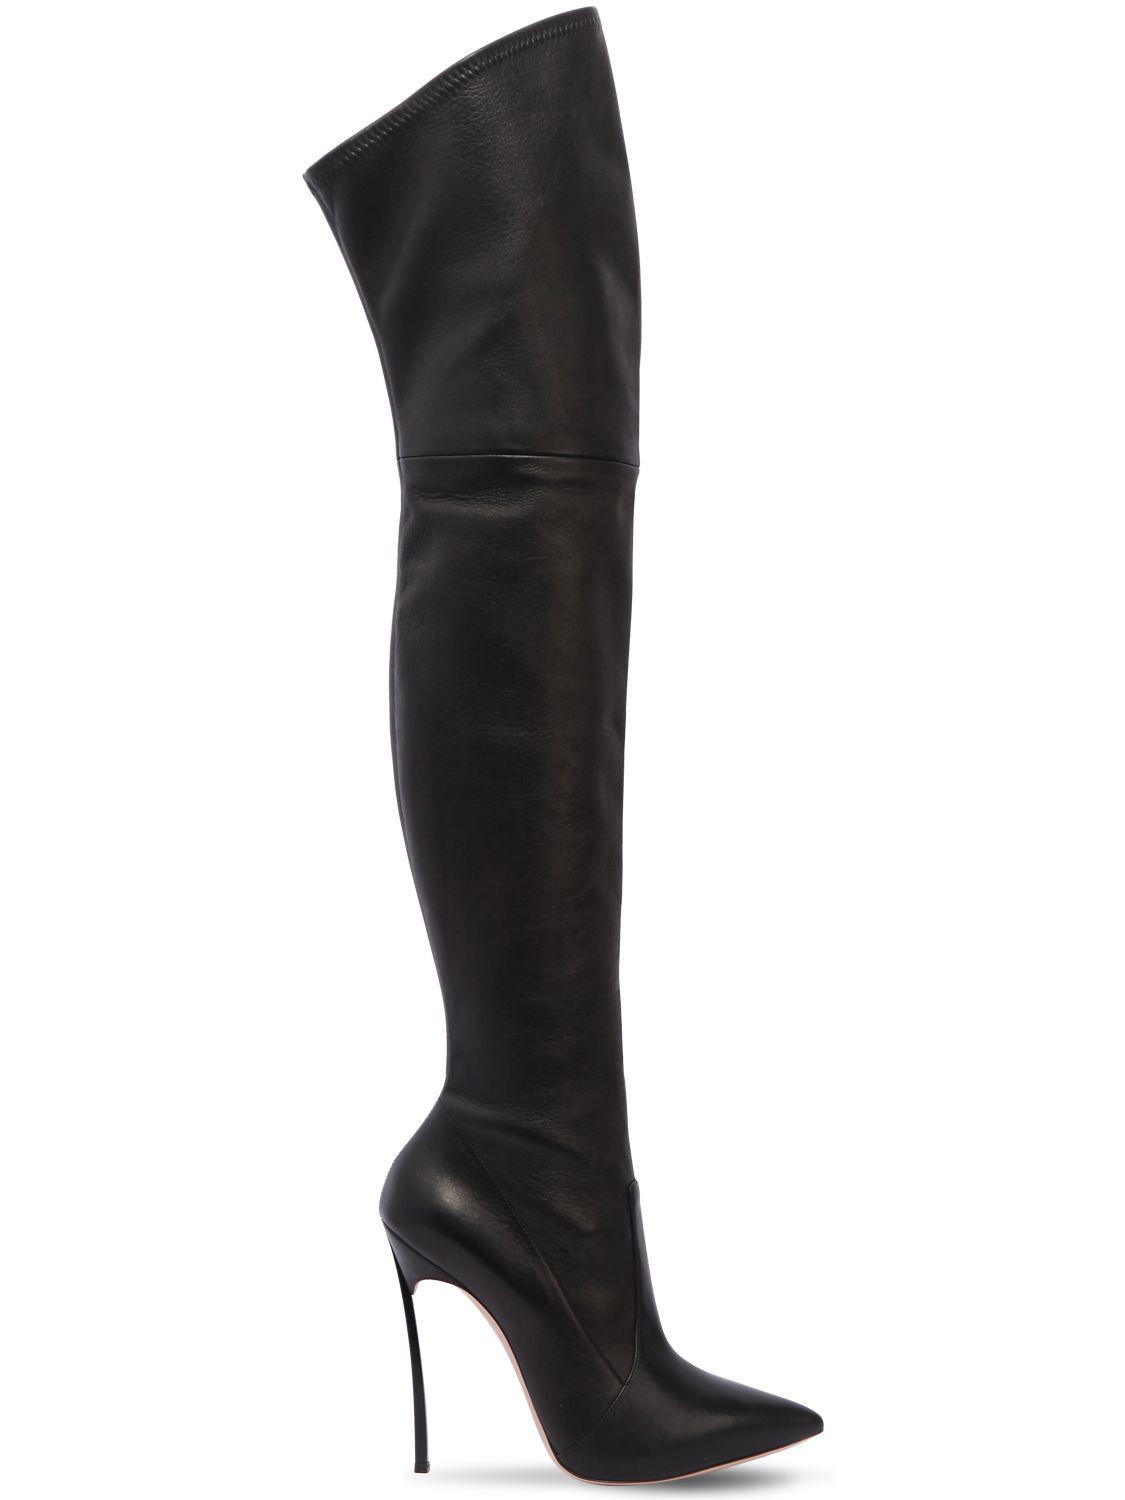 Casadei 120mm Blade Stretch Leather Boots in Black - Lyst